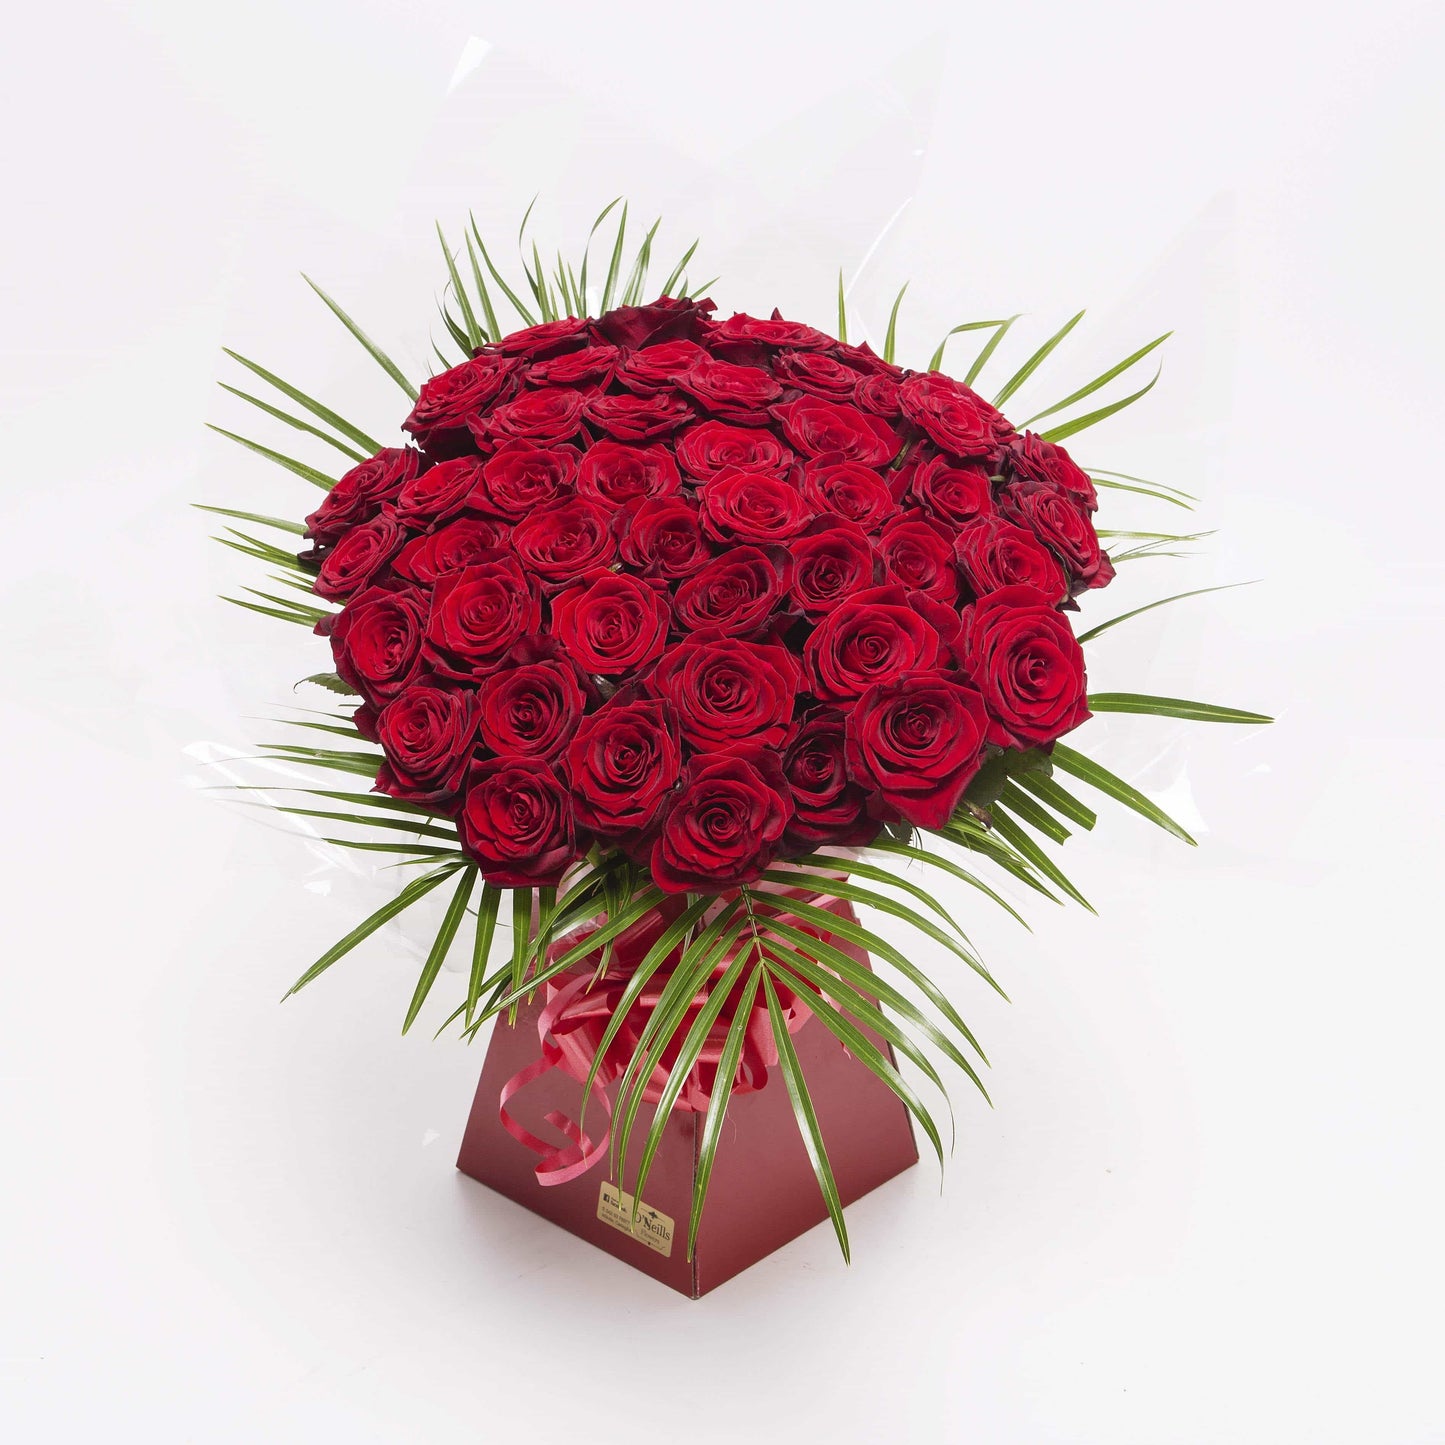 Ultimate Love - 50 Red Roses